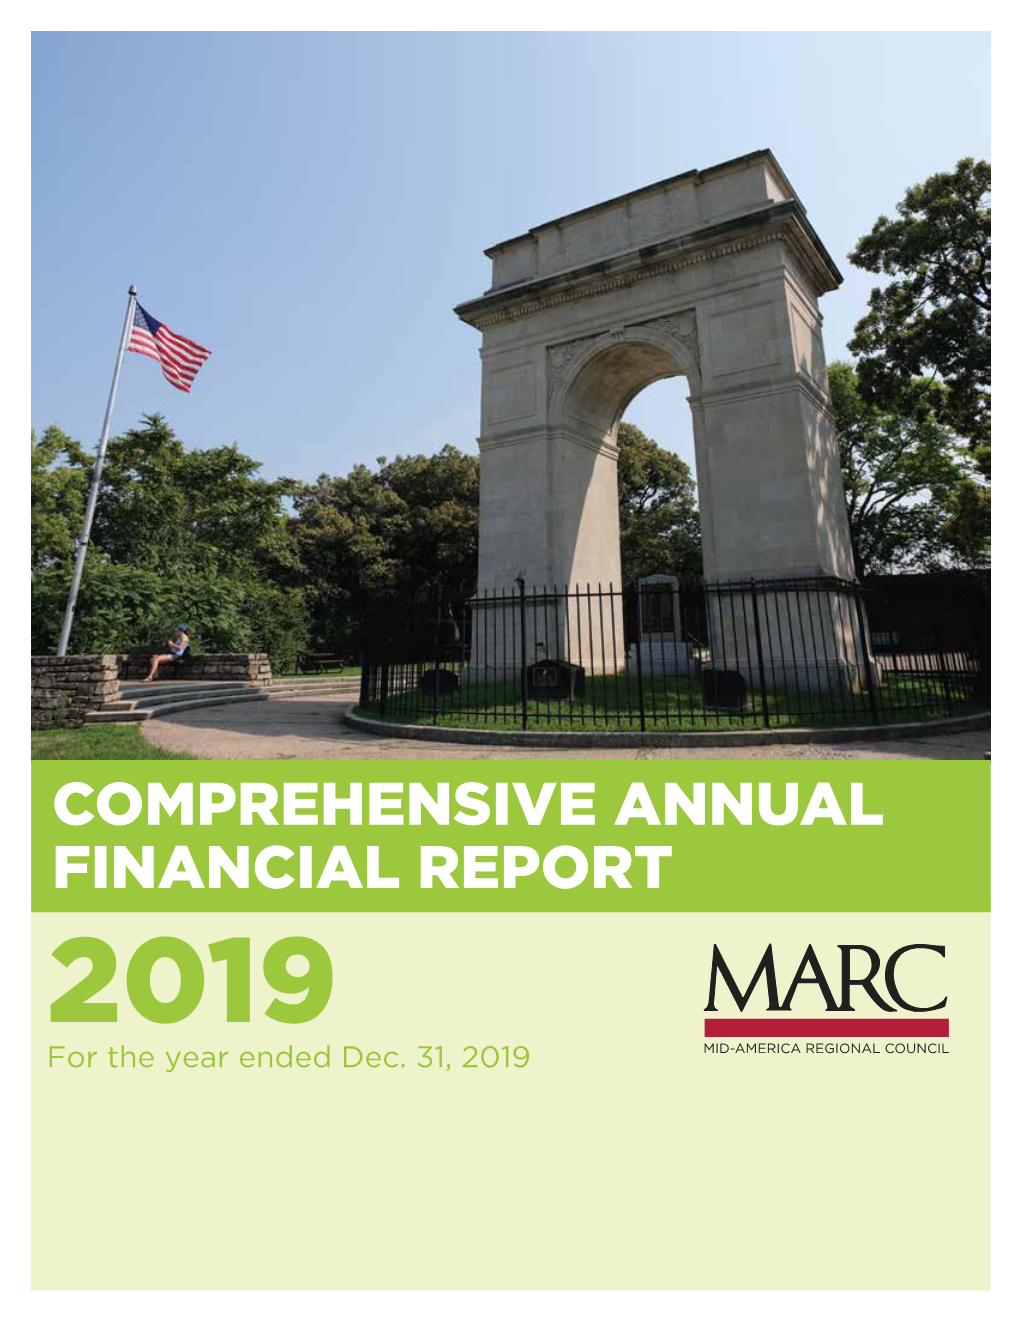 COMPREHENSIVE ANNUAL FINANCIAL REPORT 2019 for the Year Ended Dec